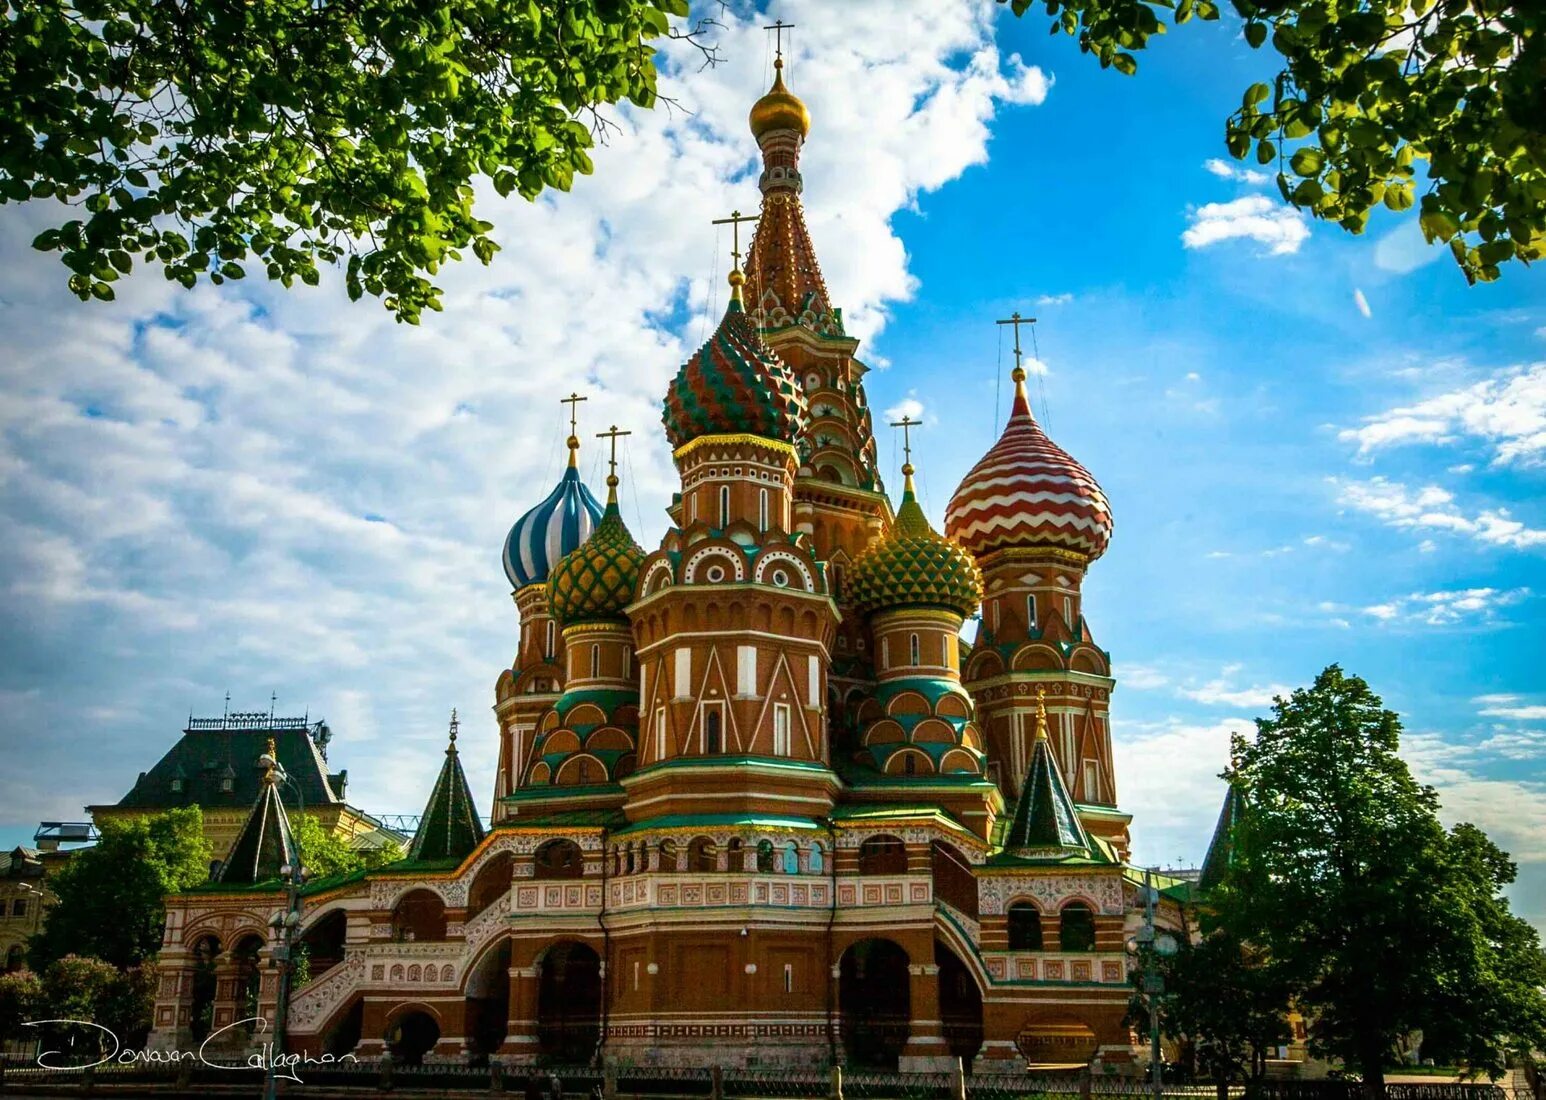 Saint Basil's Cathedral Moscow. St. Basil's Cathedral, Moscow, Russia. St. Basil 's Cathedral. Saint Basil’s Cathedral, Russia. Saint basil s